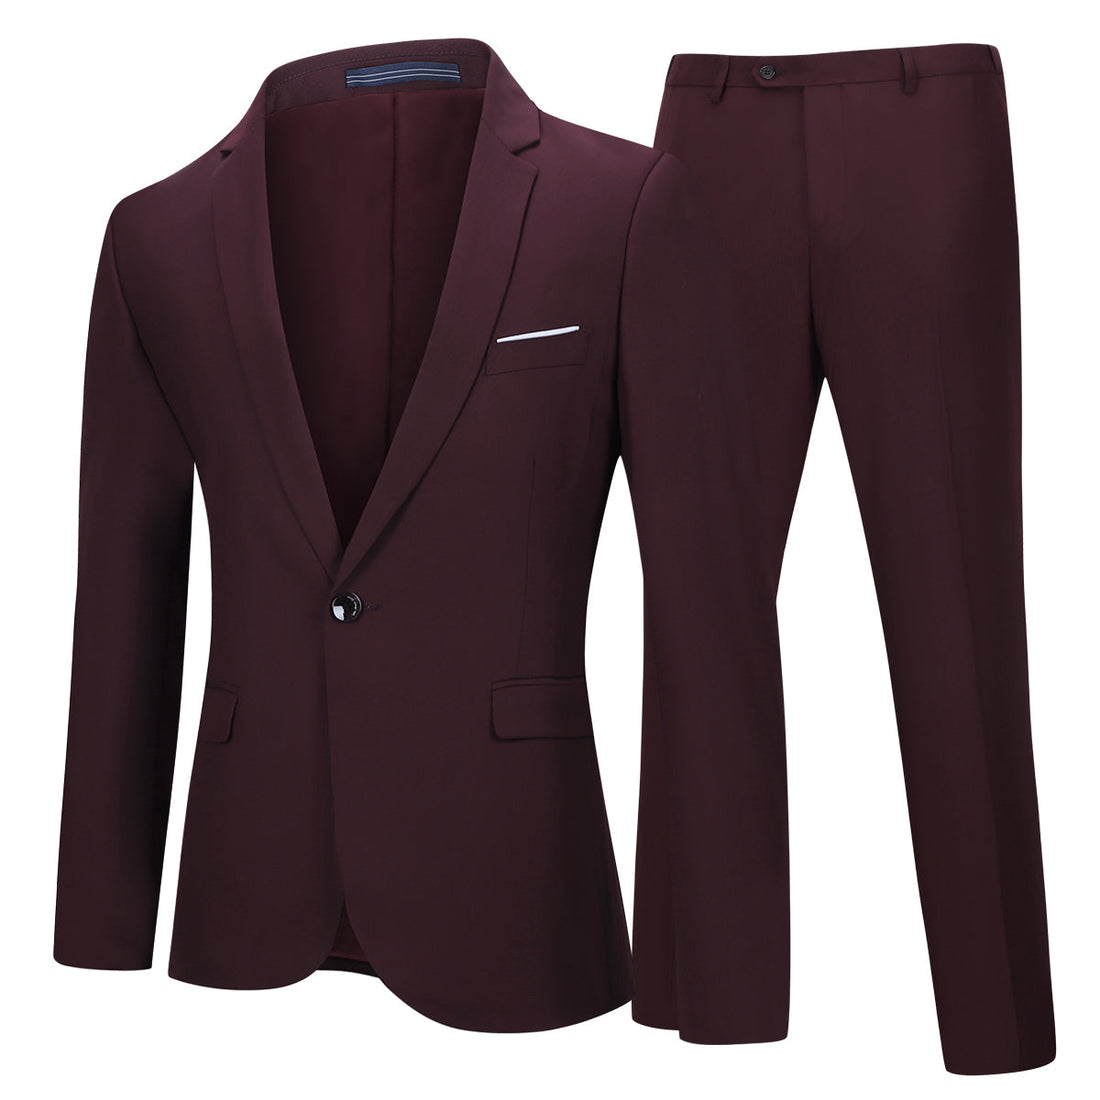 Two Piece Brick-Red Suit One Button Suit